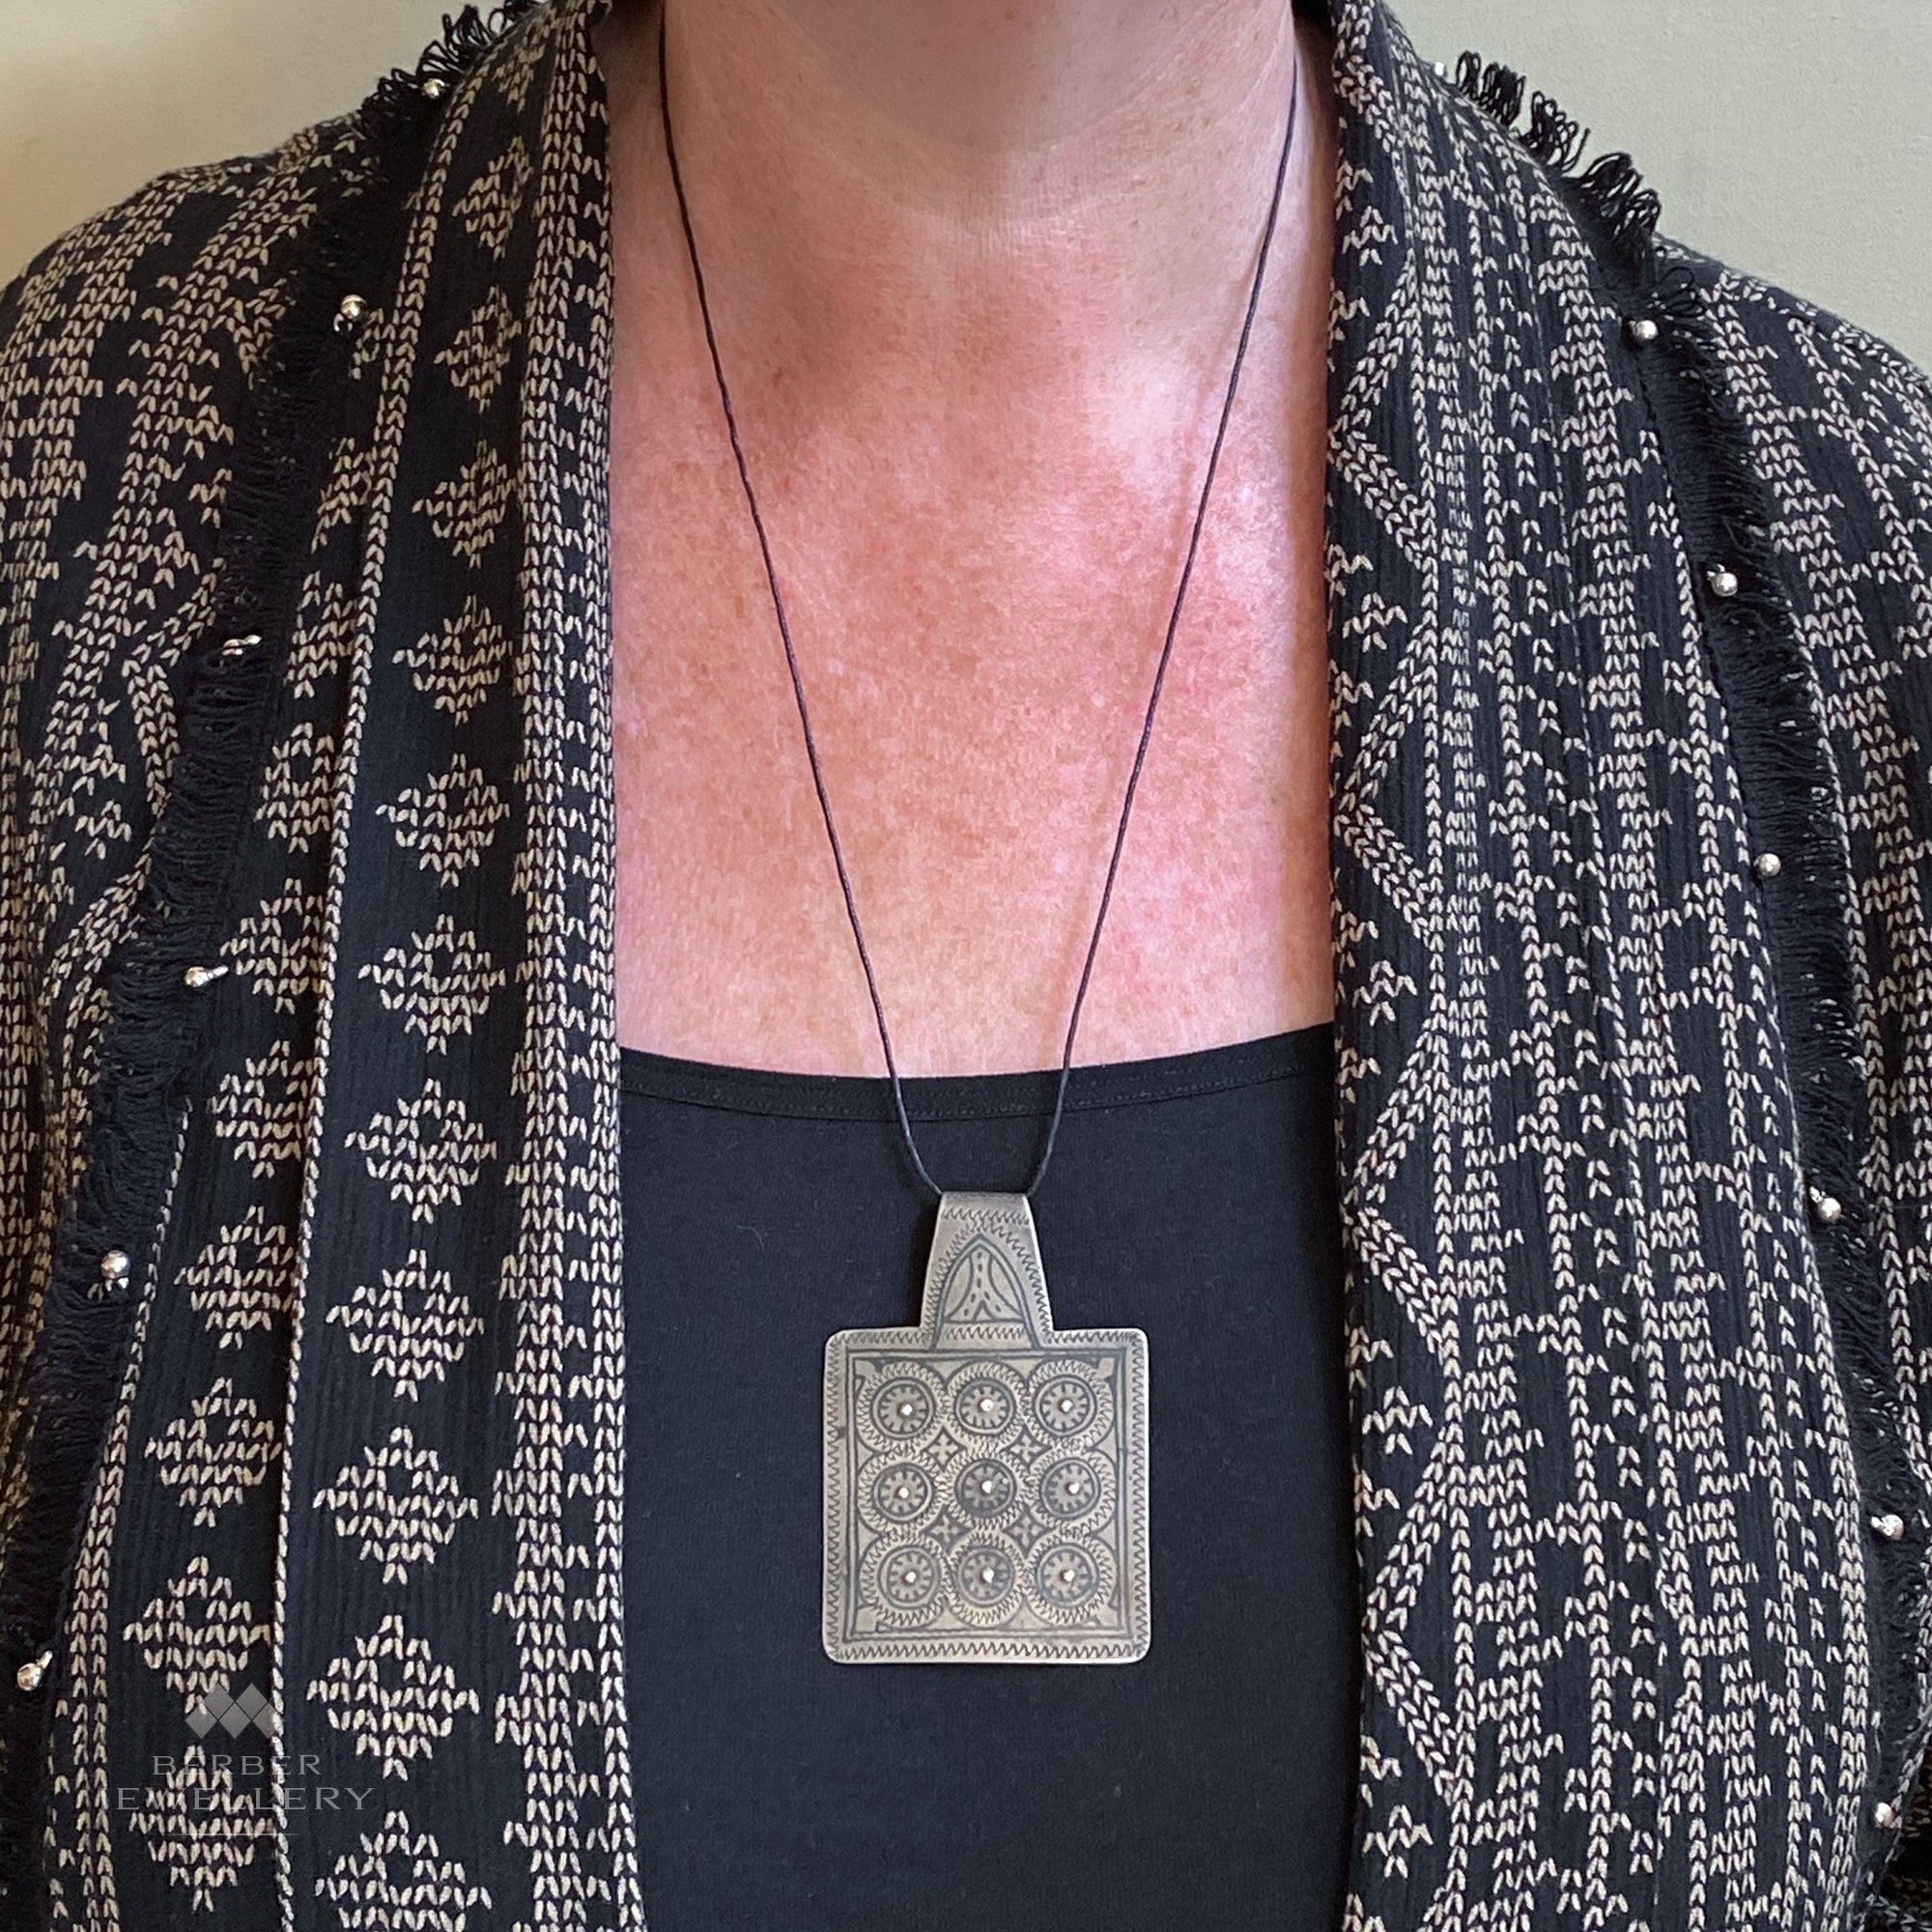 Berber Jewellery | Vintage silver pendant from Ida ou Nadif, Morocco